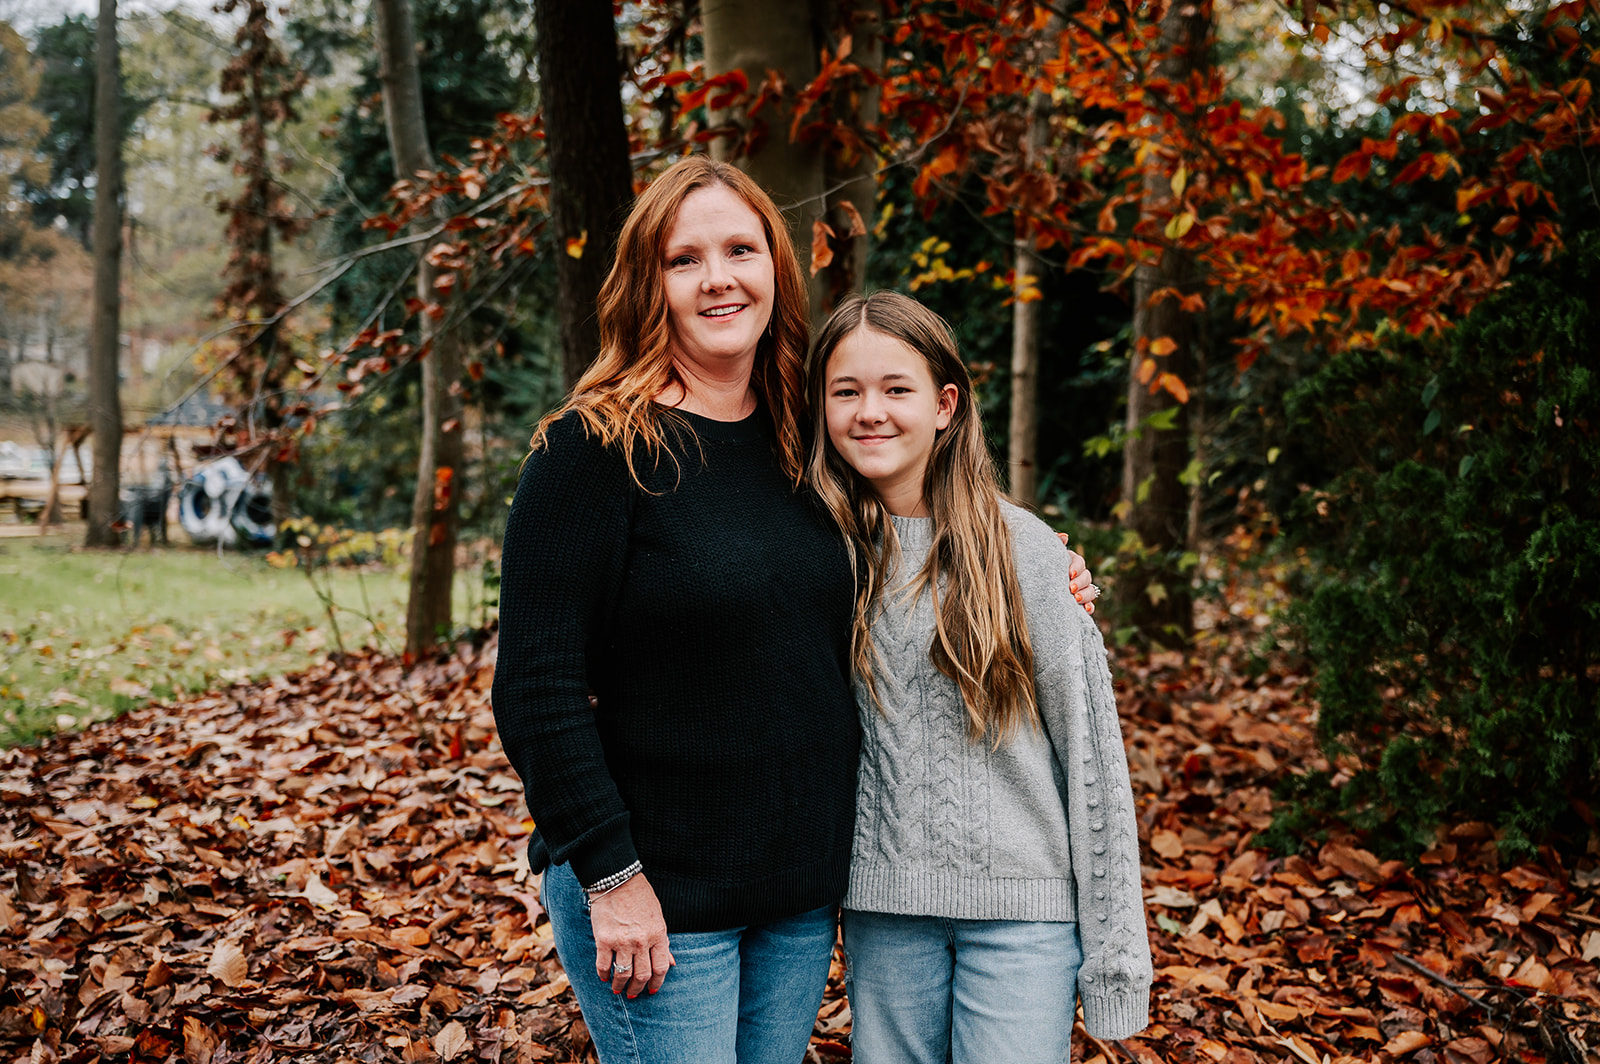 A mom in a black sweater stands by a pile of fallen leaves with her arm around her teen daughter in a grey sweater